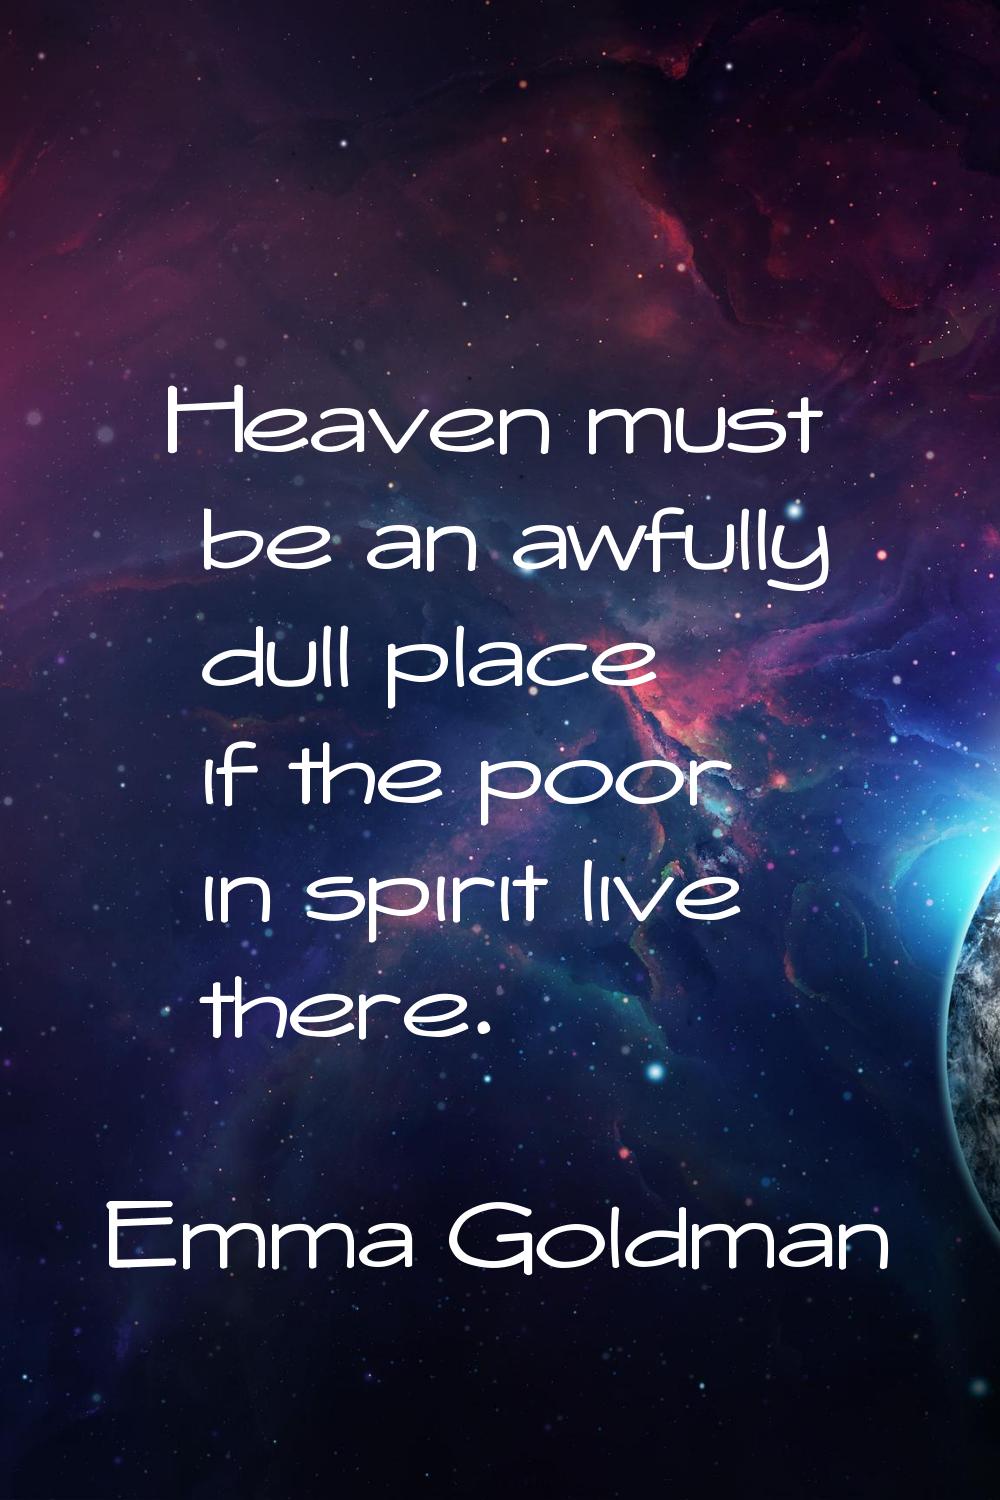 Heaven must be an awfully dull place if the poor in spirit live there.